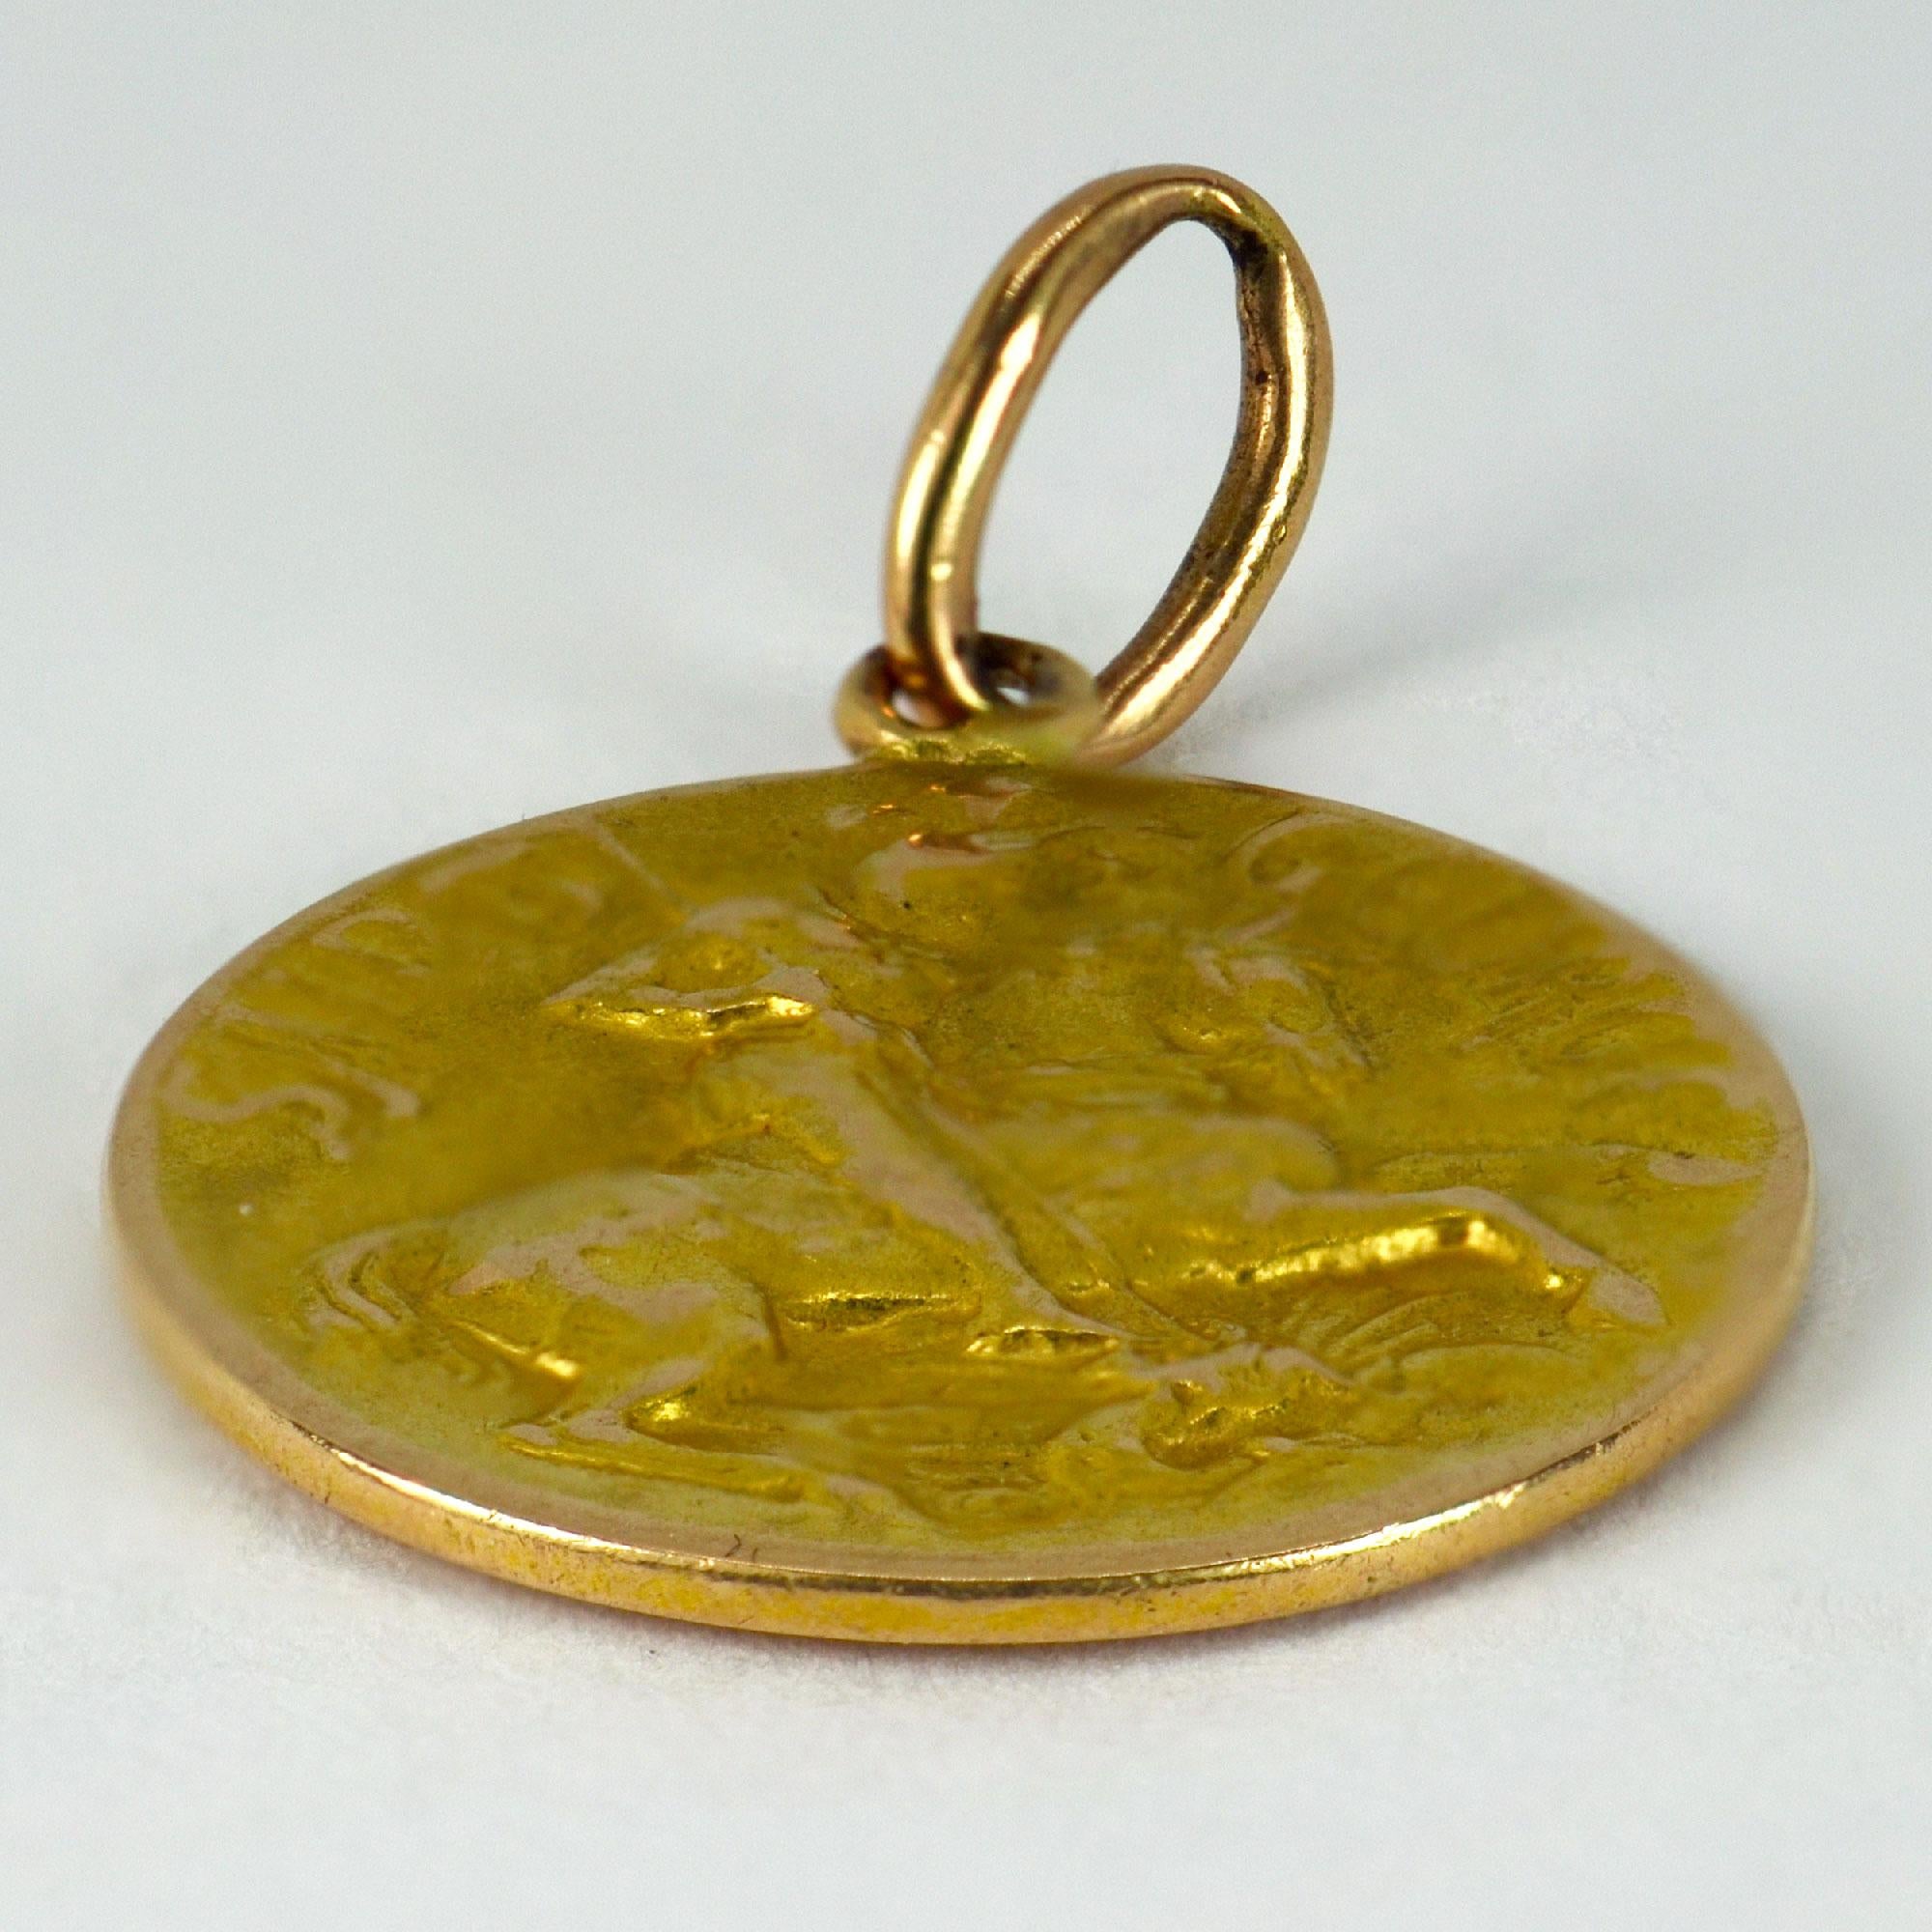 A French 18 karat (18K) yellow and rose gold charm pendant designed as a medal depicting St George defeating the dragon. The reverse depicting a ship with the motto ‘Tempestate Securitas’. Stamped with the owl for 18 karat gold and French import.